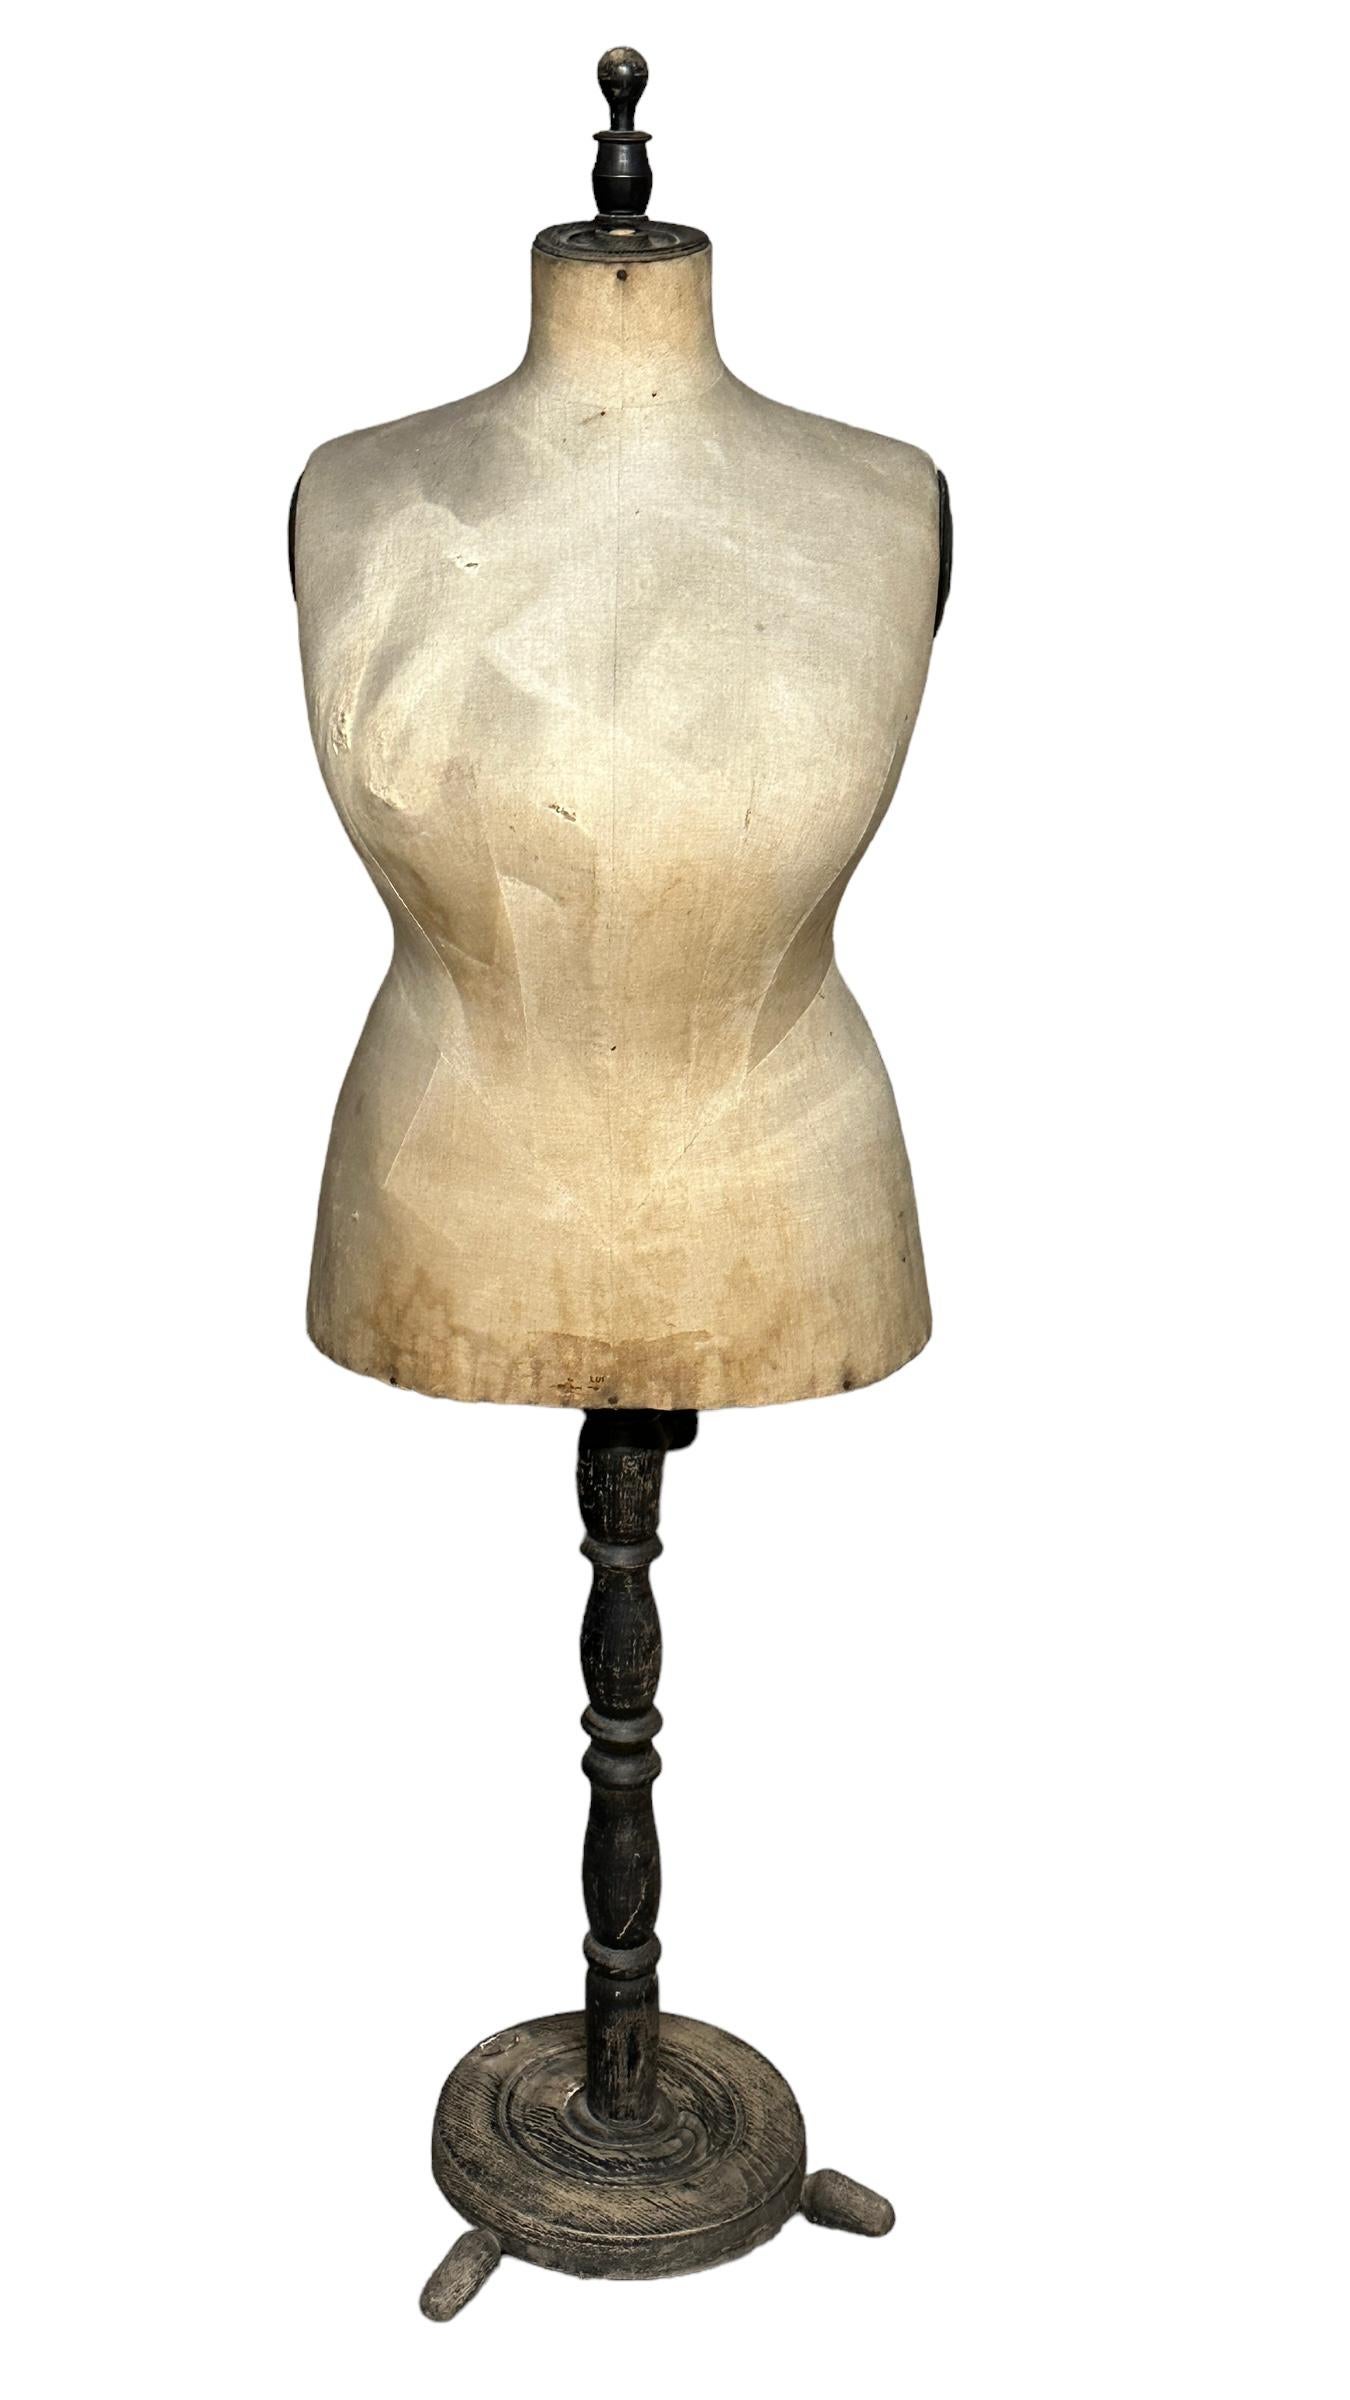 A great looking originally used by Austrian tailors and dressmakers for draping, alterations, and creating the latest fashion, this vintage dressmaker mannequin is also a great piece of decor. This adjustable height dress form has ebonized and